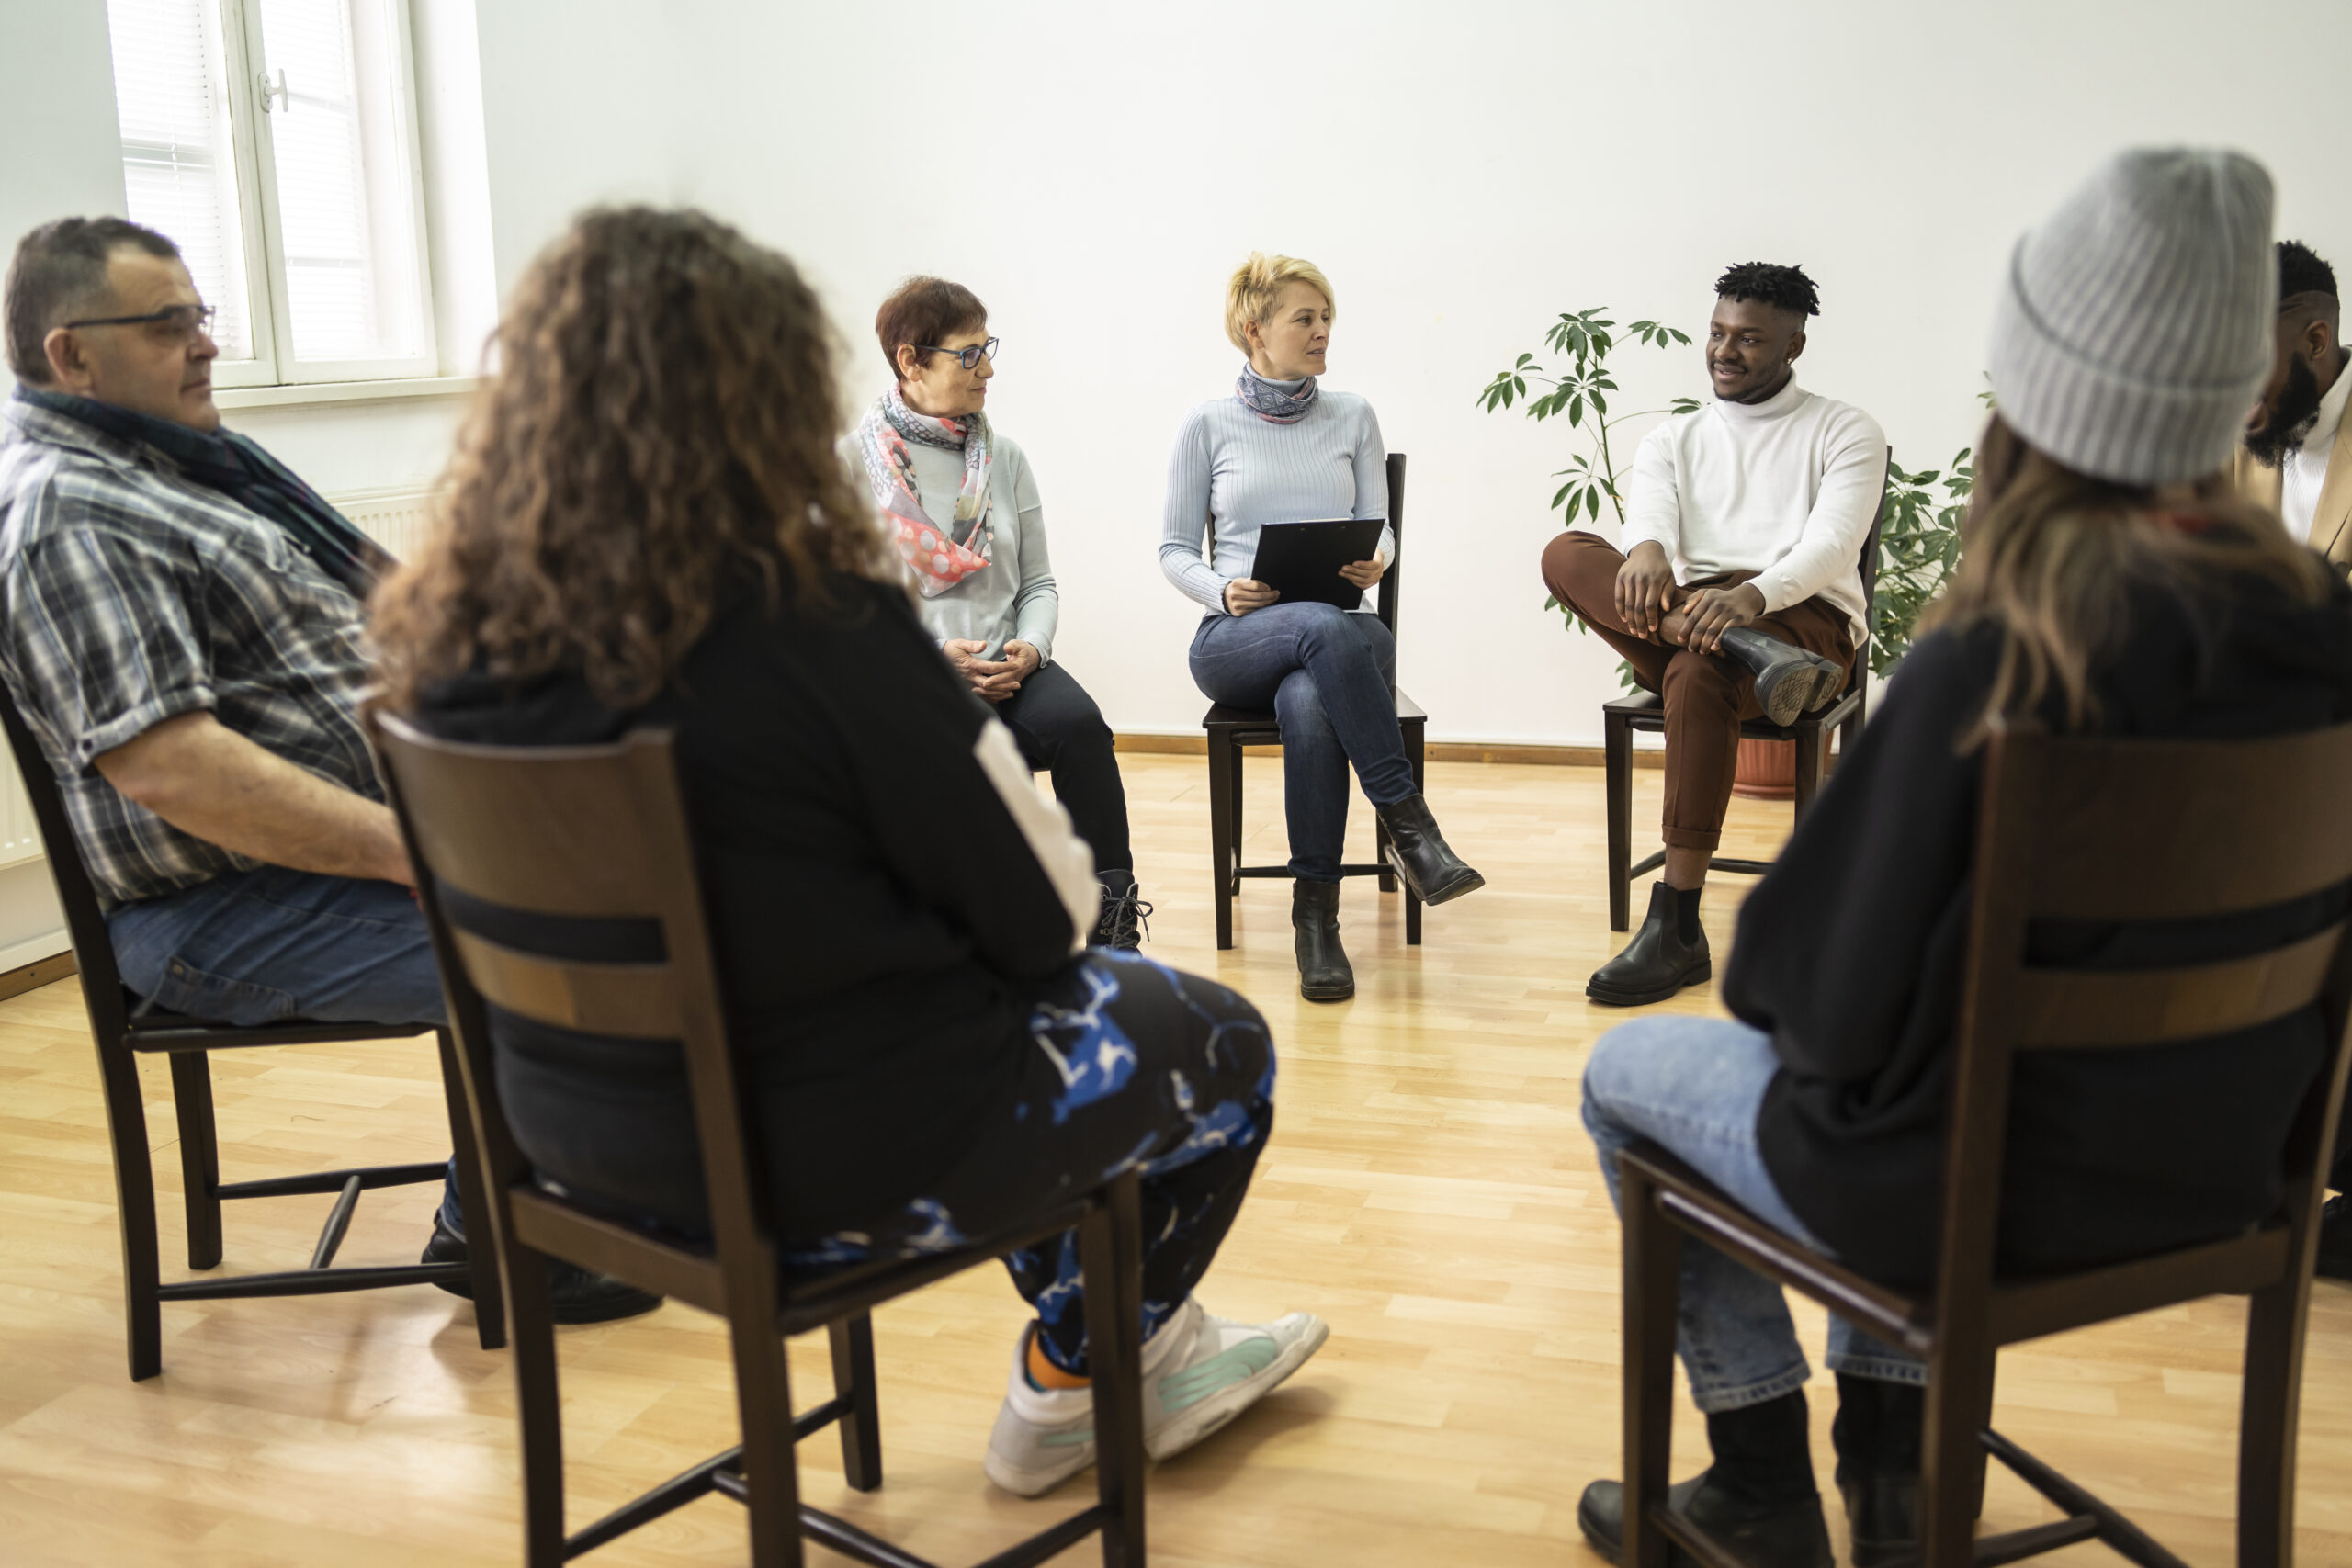 Group therapy for addiction recovery